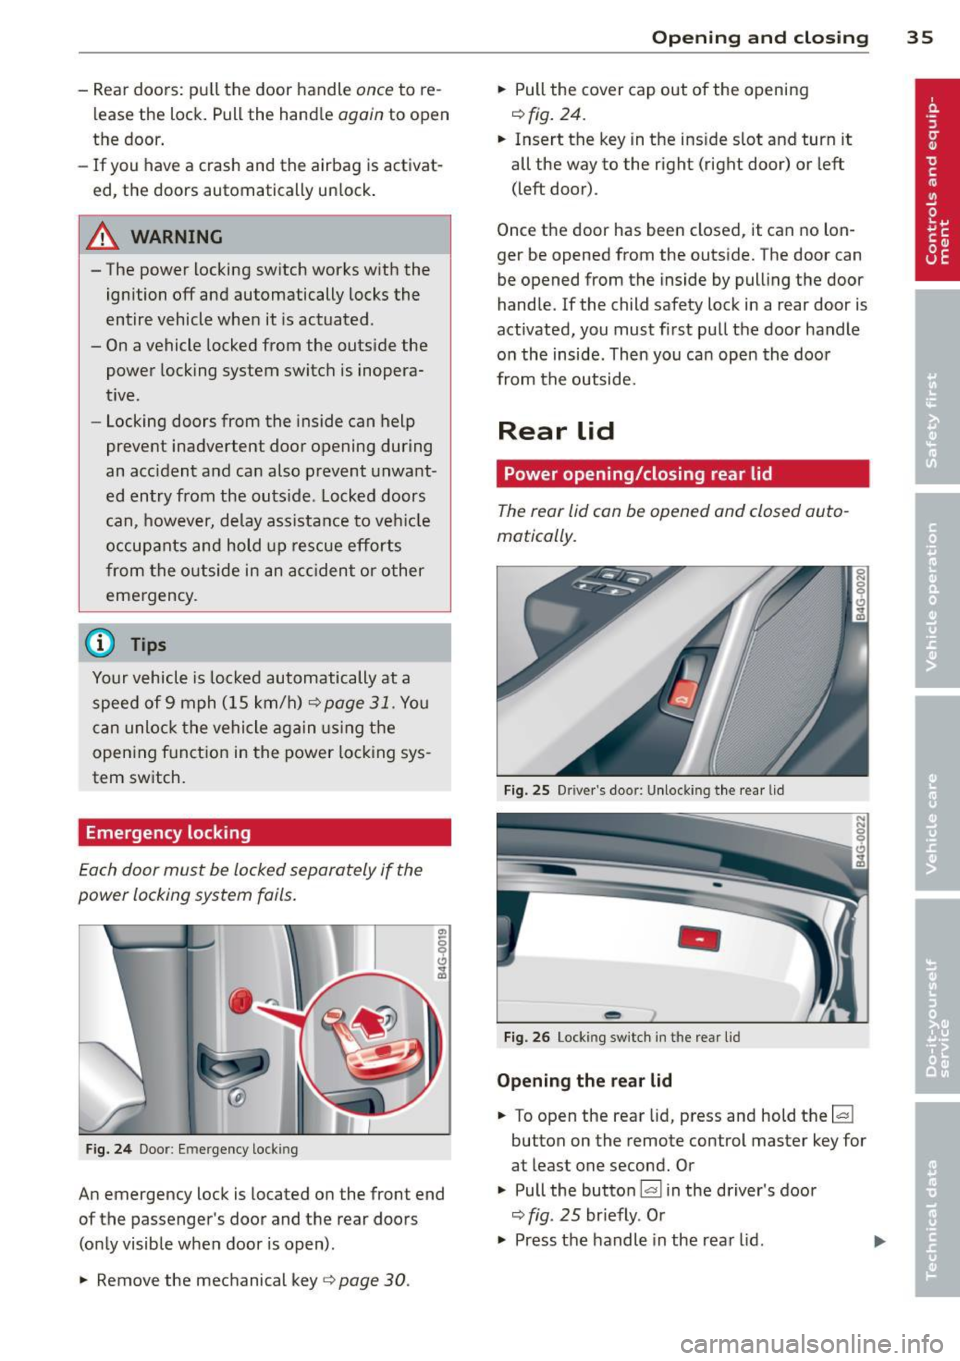 AUDI S7 2012  Owners Manual - Rear  doors:  pull the  door  handle once to  re­
lease  the  lock.  Pull the  hand le 
again to  open 
the  door . 
- If  you  have  a  crash  and  the  airbag  is activat­
ed,  the  doors  autom